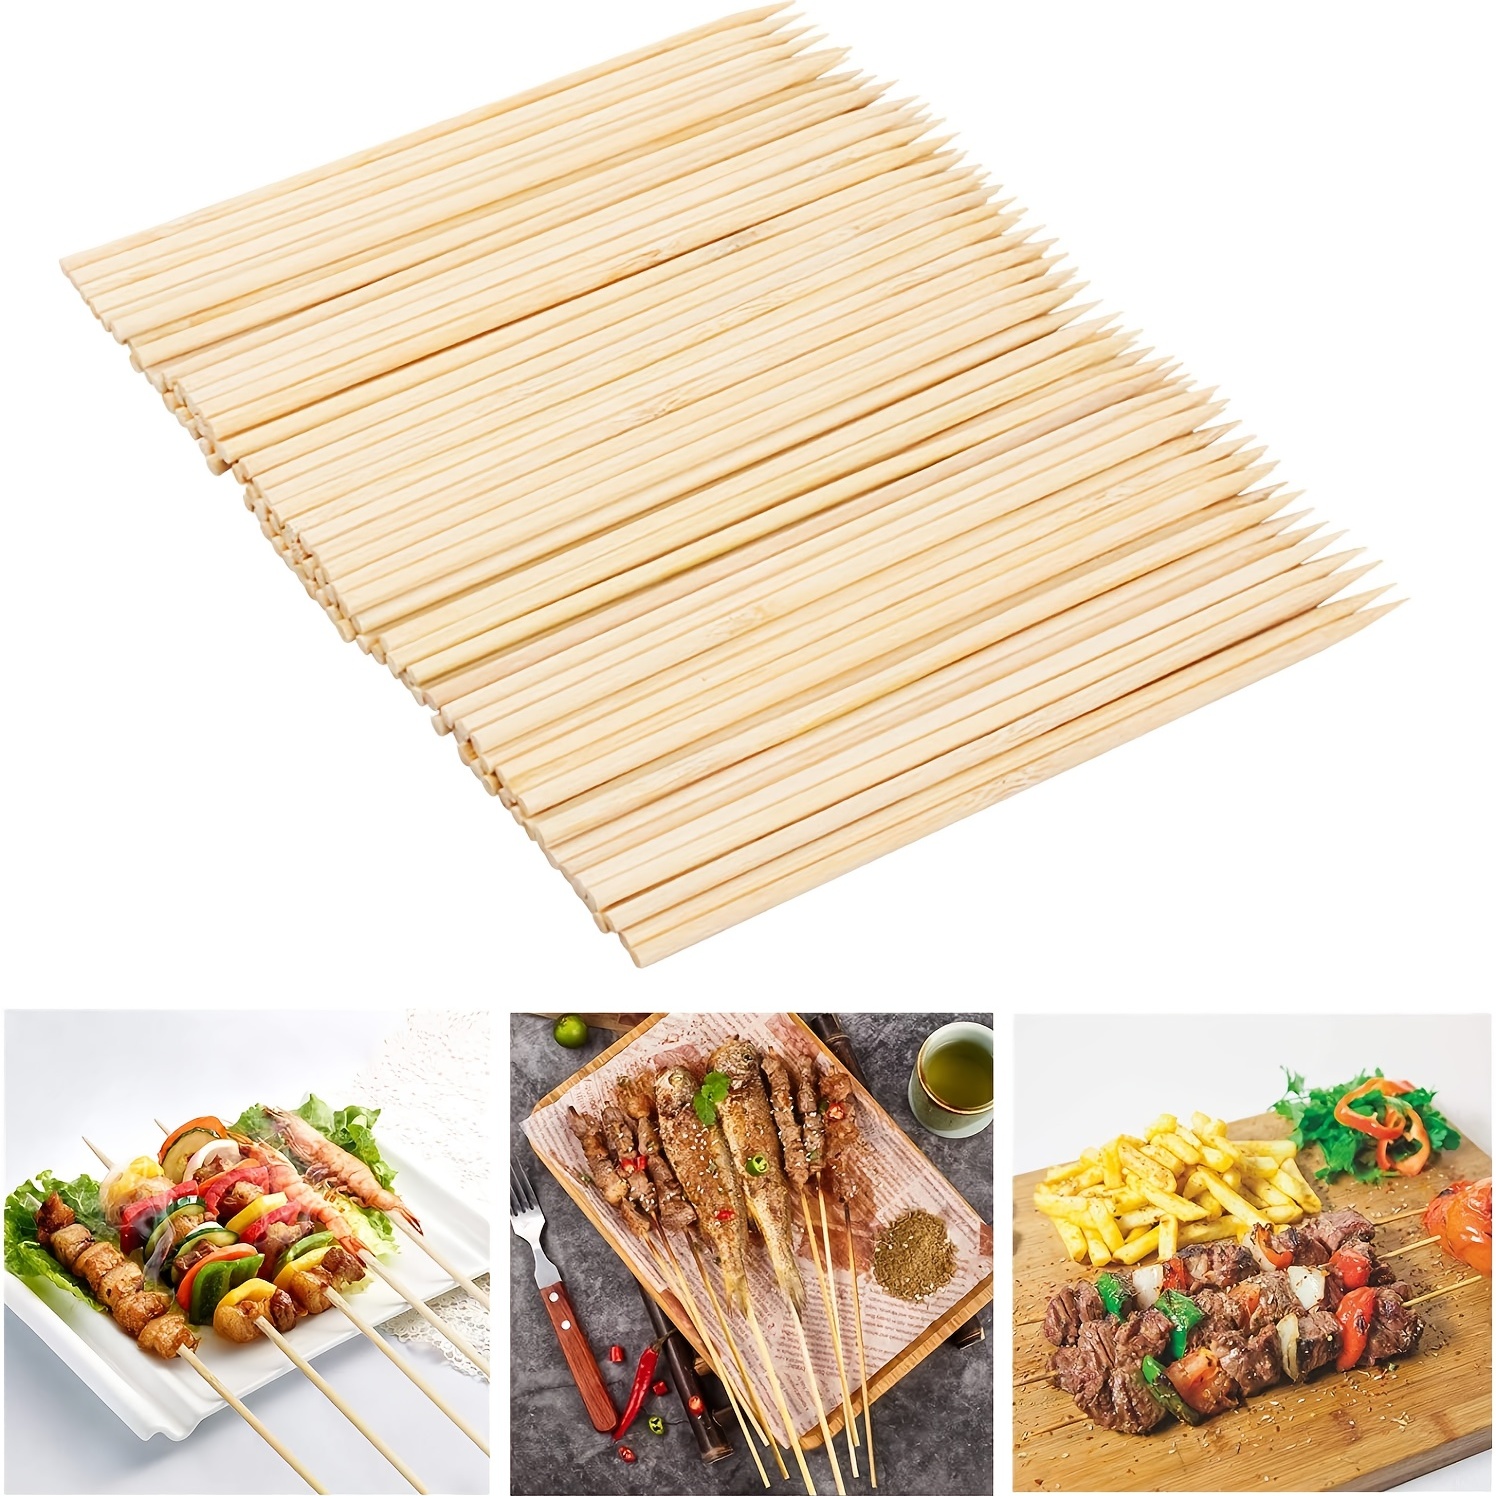 100pcs Natural Bamboo Skewers for Barbecue Appetizer & Kitchen Parties!